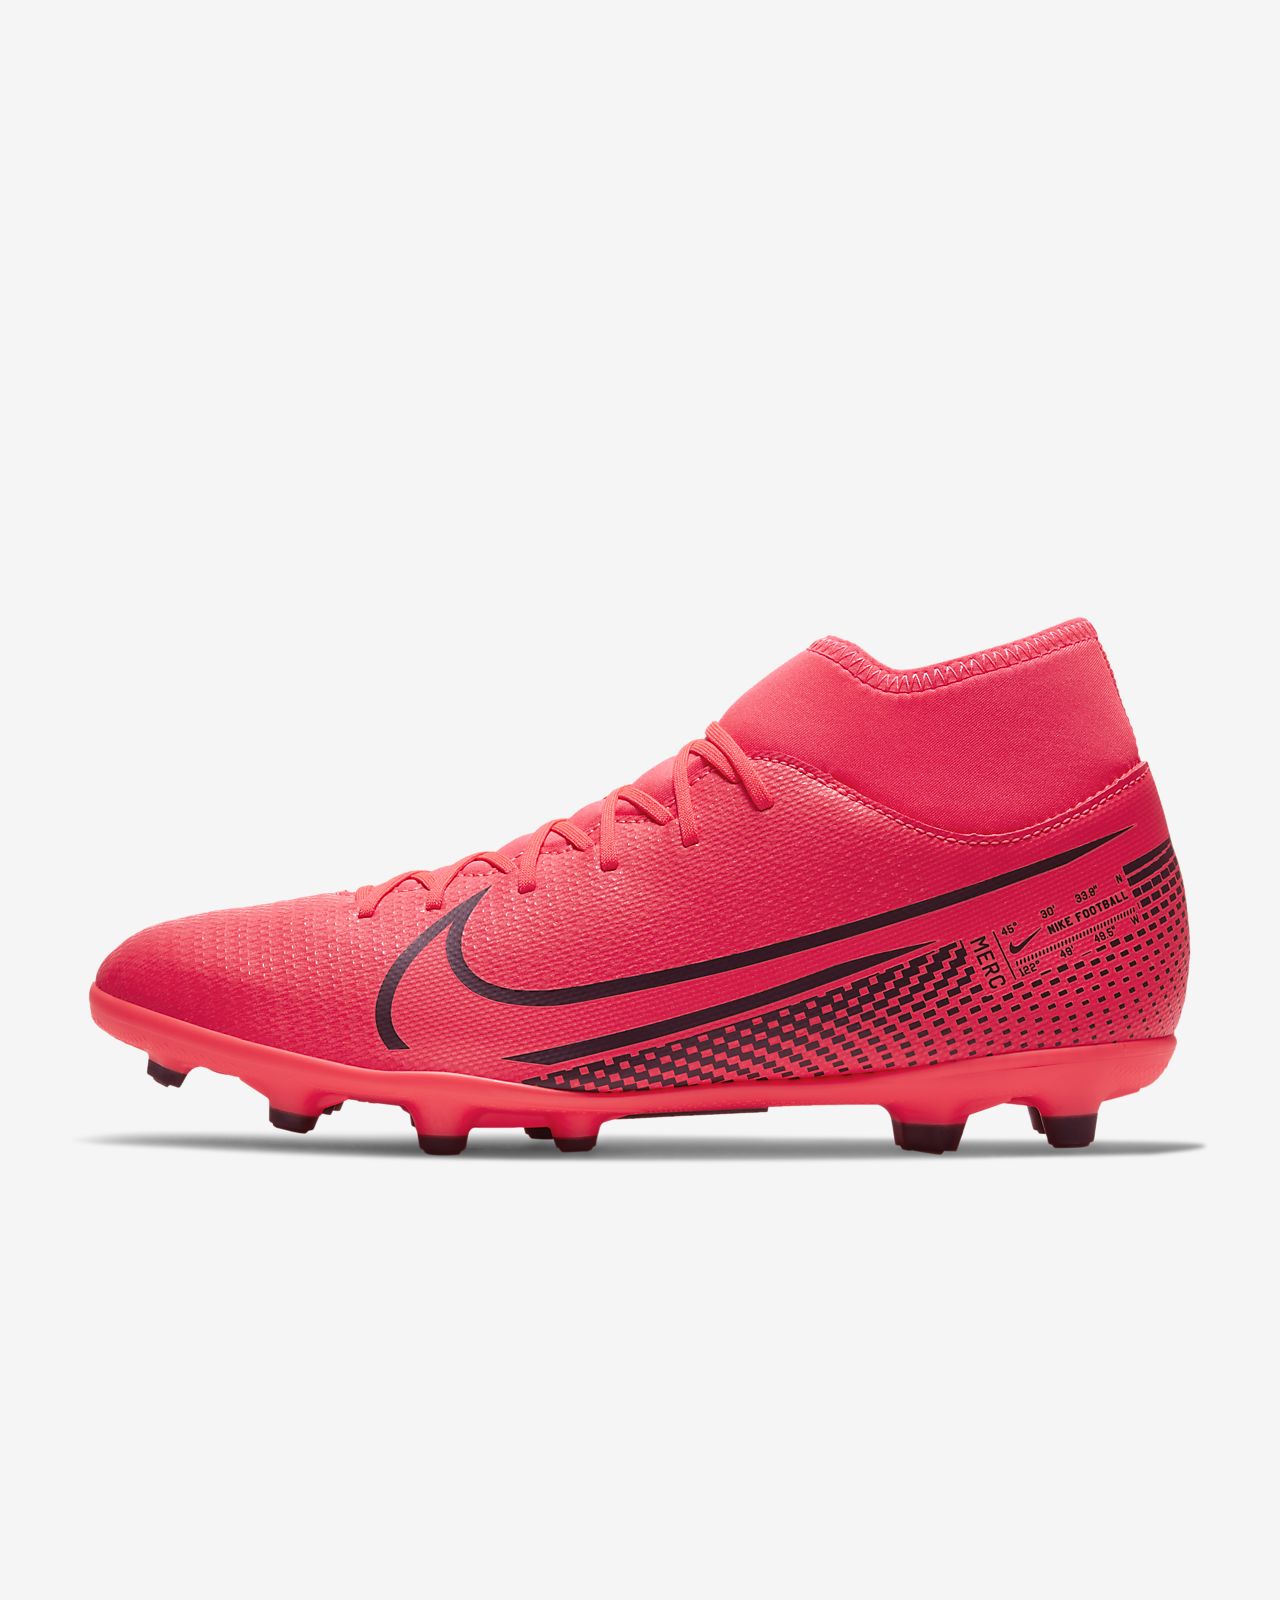 Nike Superfly 6 Club Artificial Turf Soccer Cleat Modell 's.